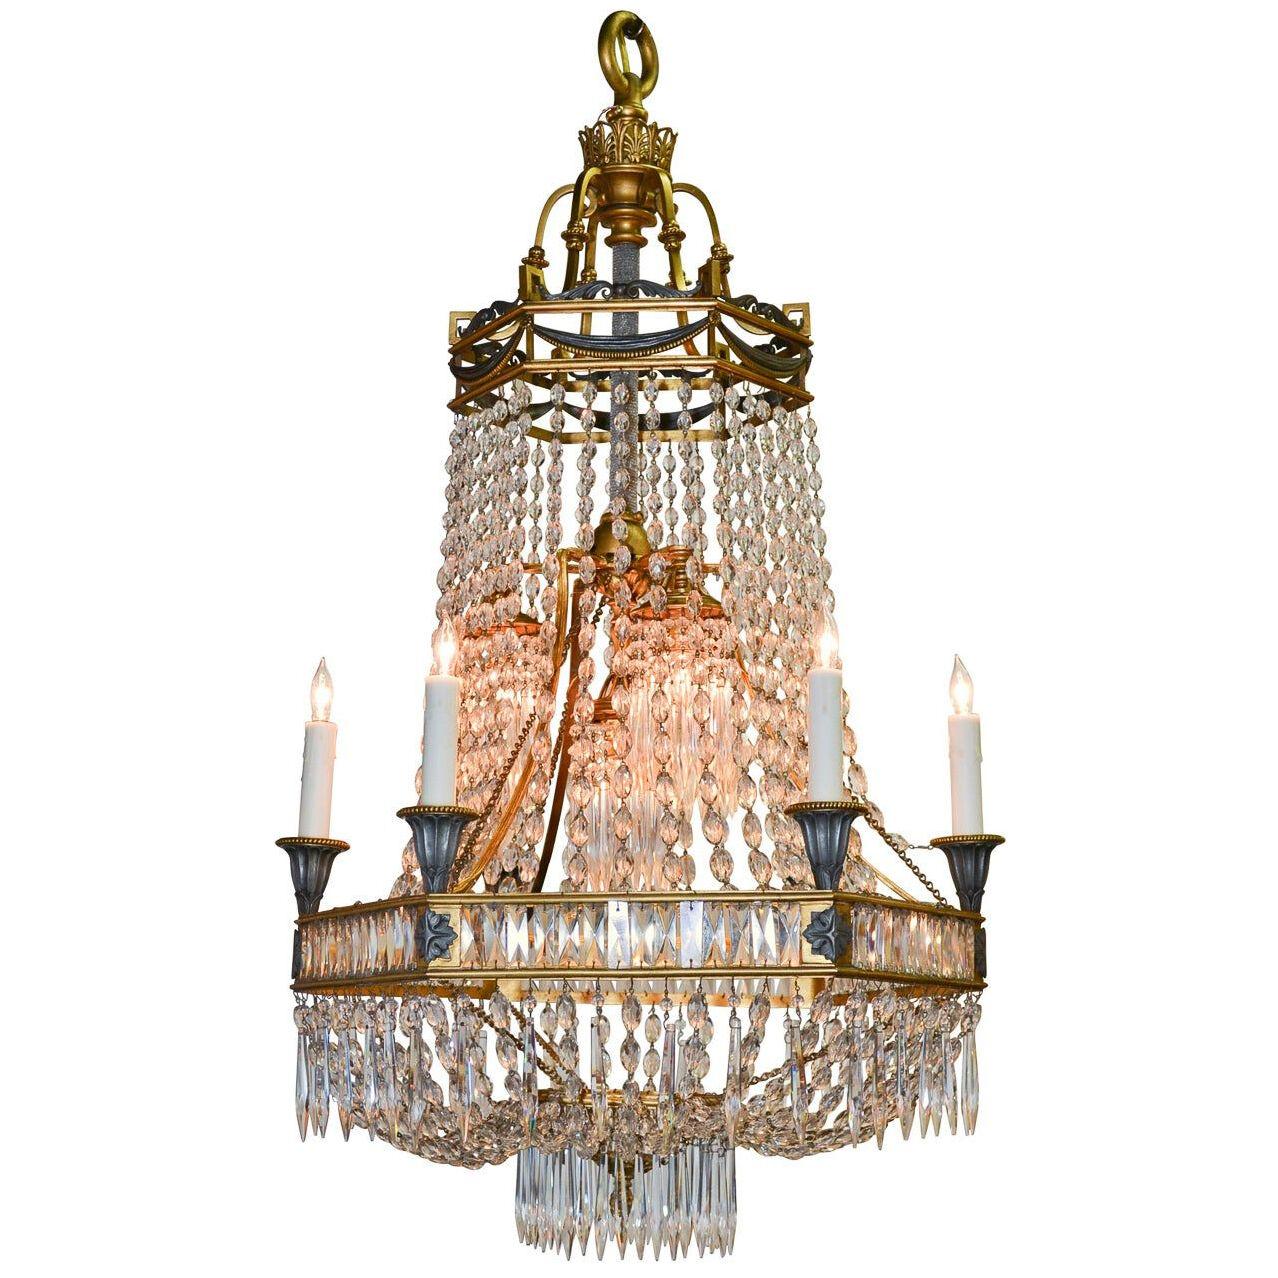 19th Century French Neoclassical Chandelier